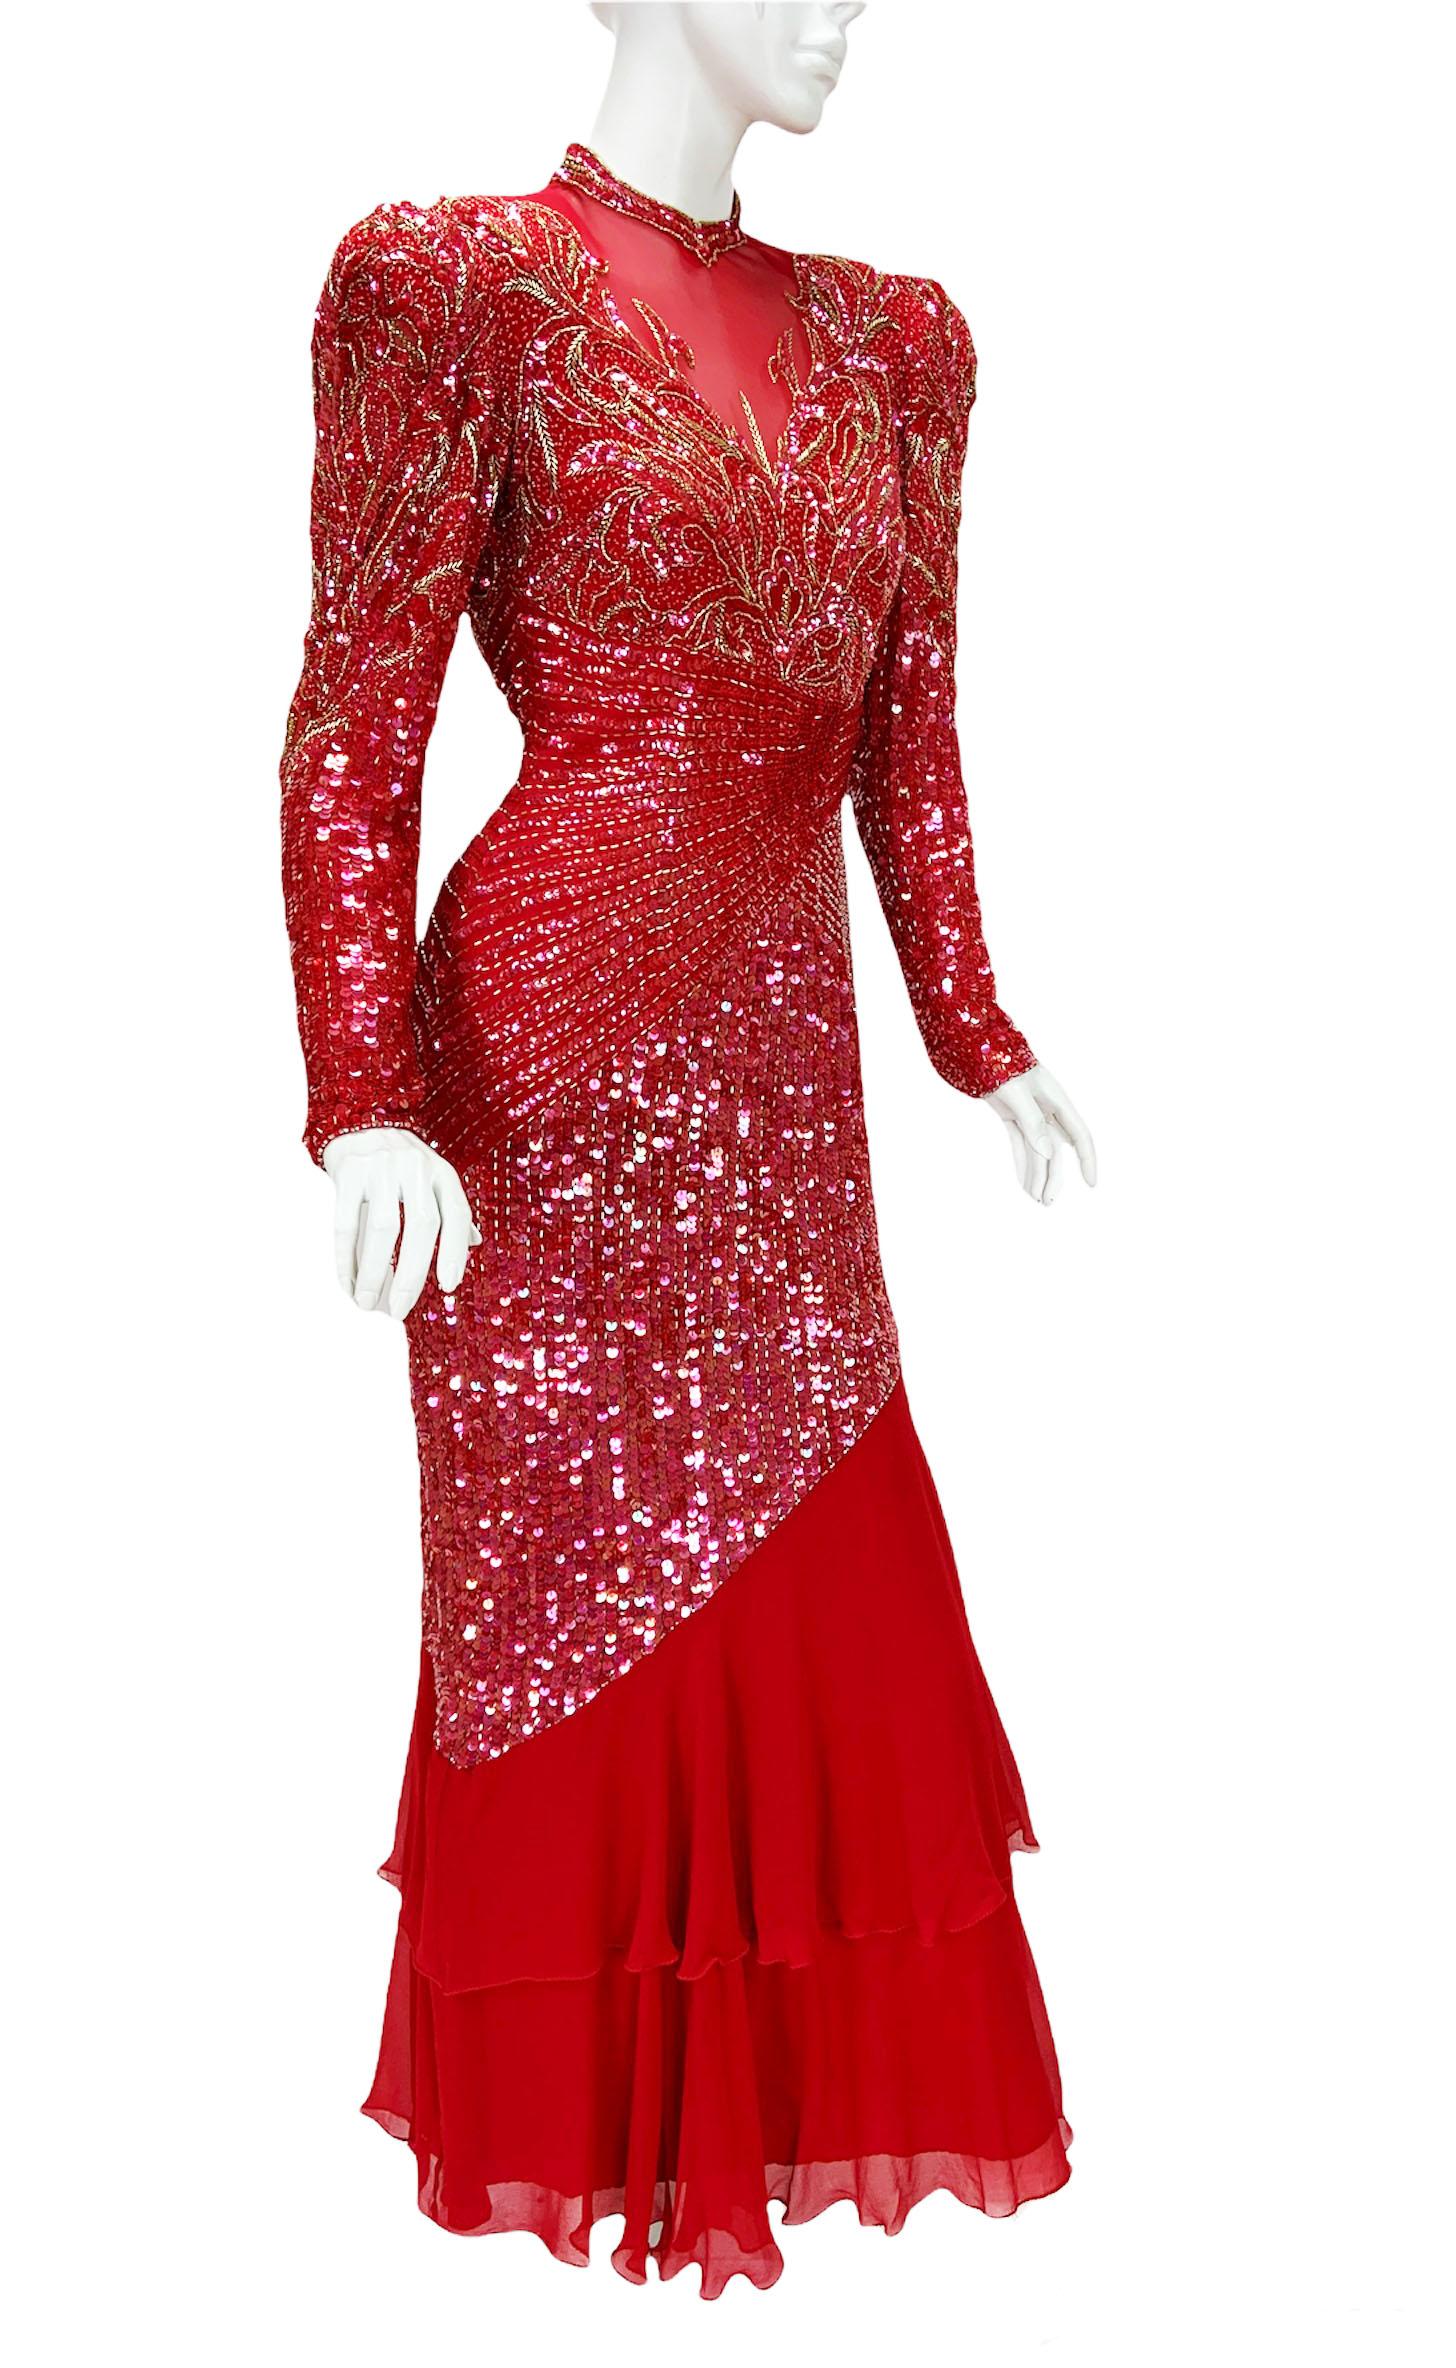 Vintage Bob Mackie Boutique 1980s Fully Embellished Red Long Dress
Size Label Missing - Please check Measurements
100% Silk, Finely Beaded with Gold and Red Beads, and Red Sequins. Double Skirt, Padded Shoulders, Fully Lined, Back Zip